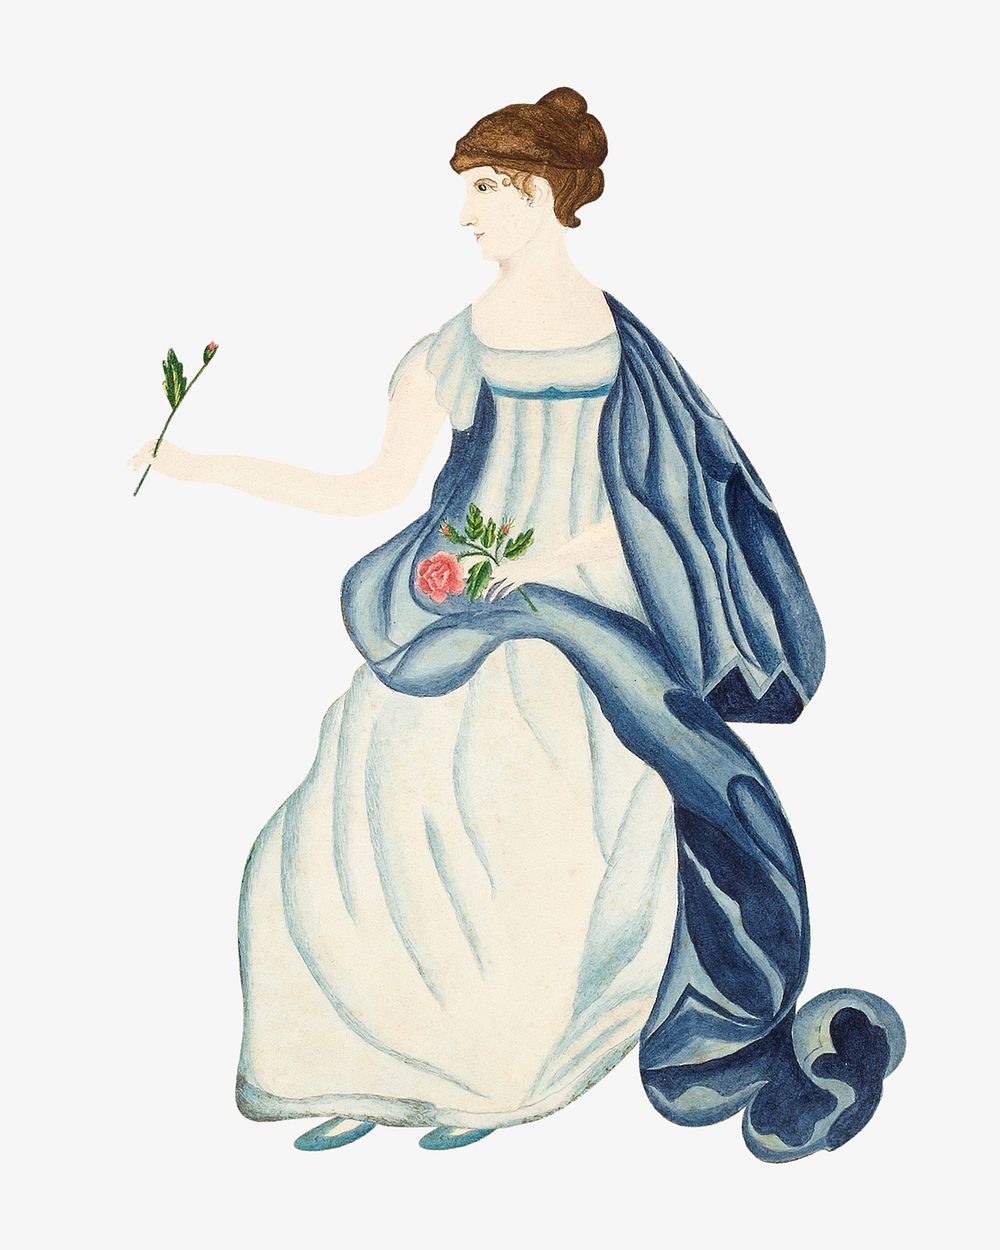 Victorian woman, vintage illustration by Sarah P. Wells. Remixed by rawpixel.